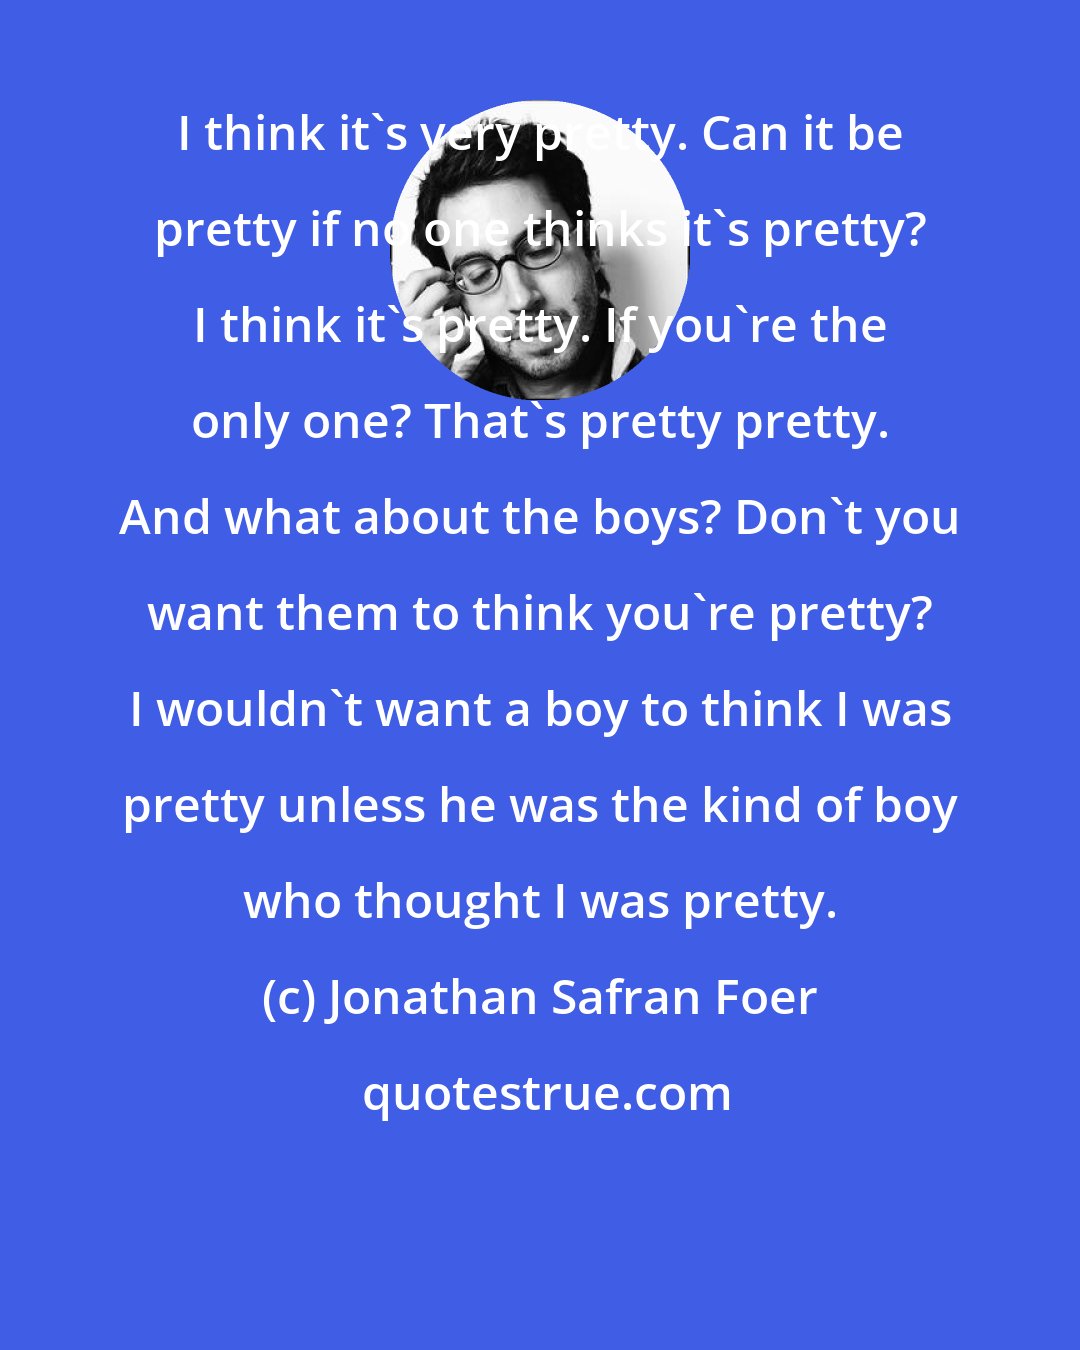 Jonathan Safran Foer: I think it's very pretty. Can it be pretty if no one thinks it's pretty? I think it's pretty. If you're the only one? That's pretty pretty. And what about the boys? Don't you want them to think you're pretty? I wouldn't want a boy to think I was pretty unless he was the kind of boy who thought I was pretty.